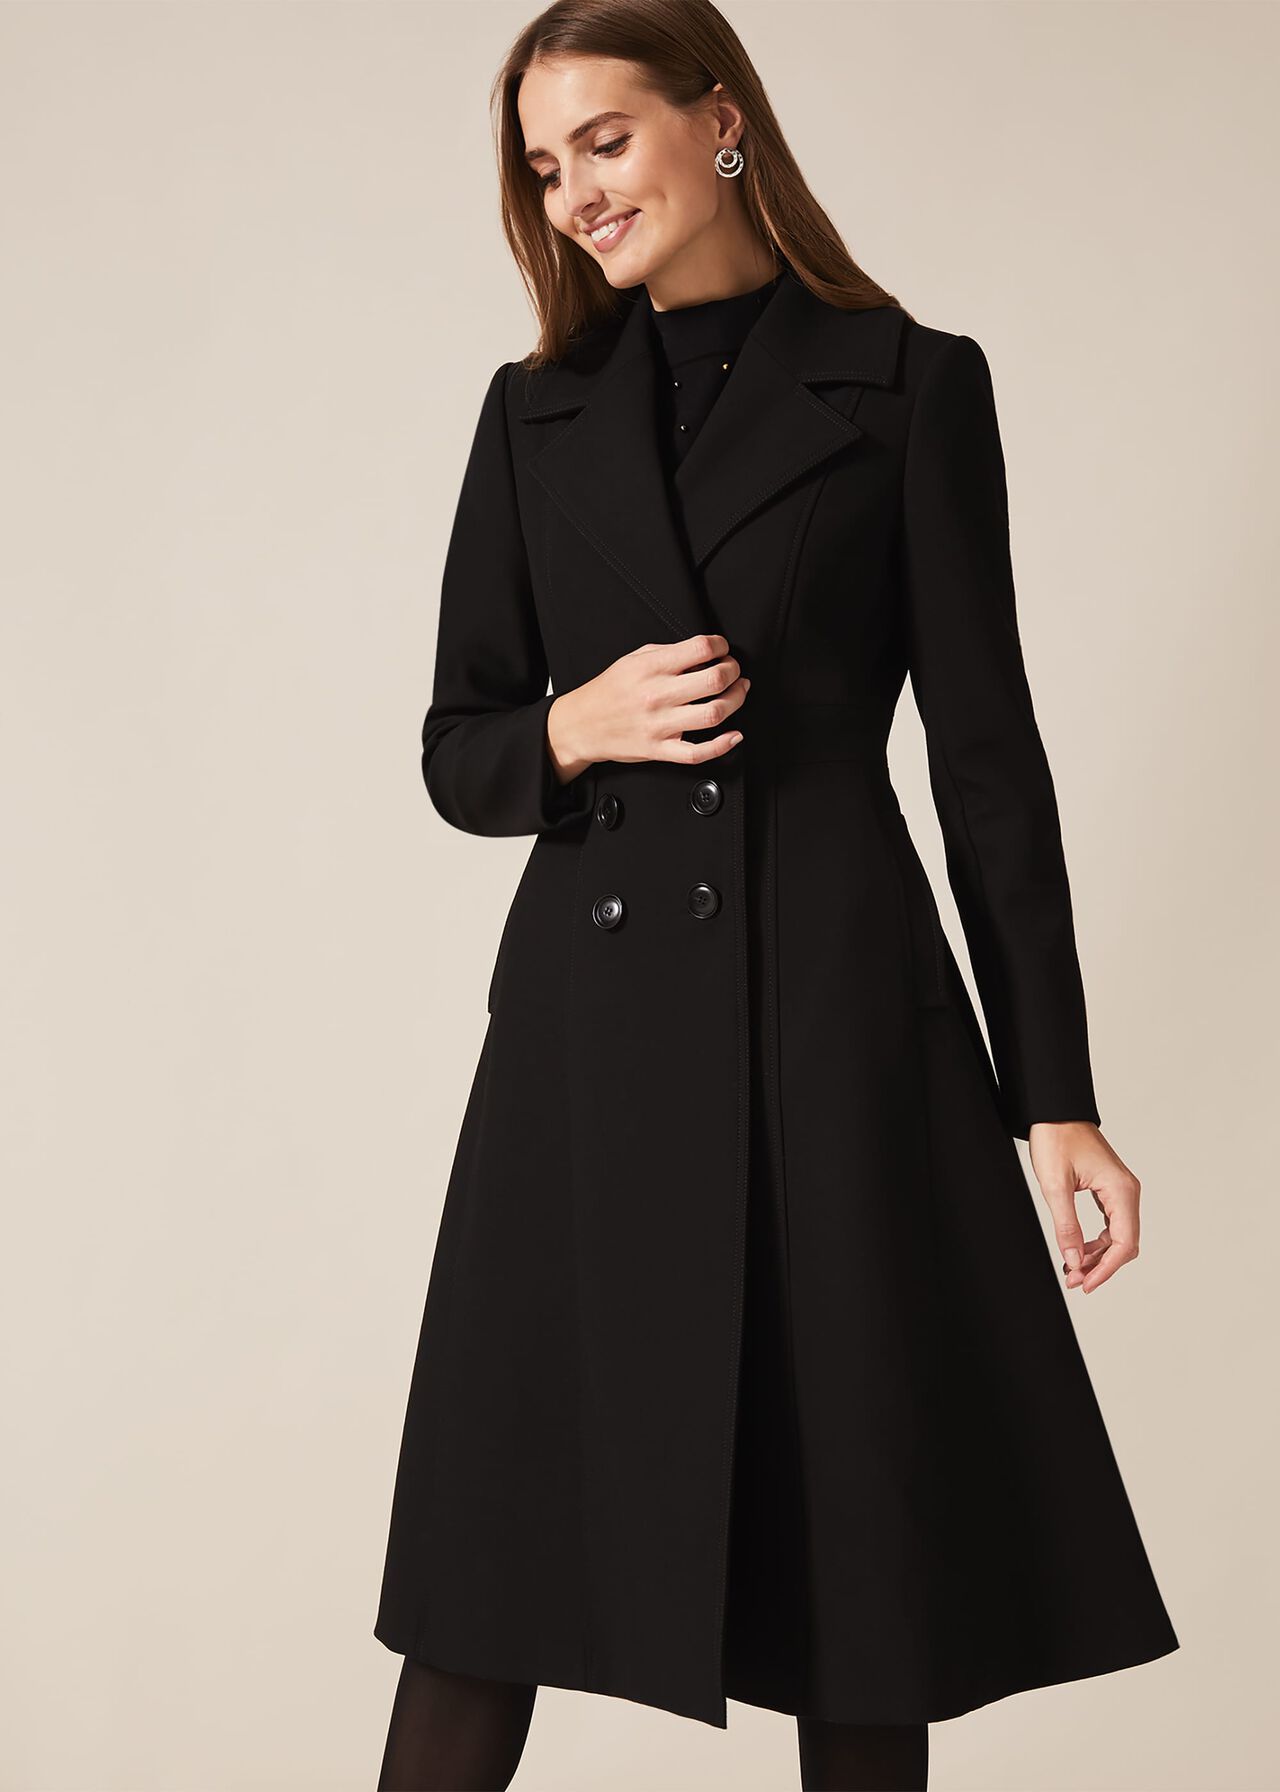 How To Style A Long Coat When You're Petite - Poor Little It Girl